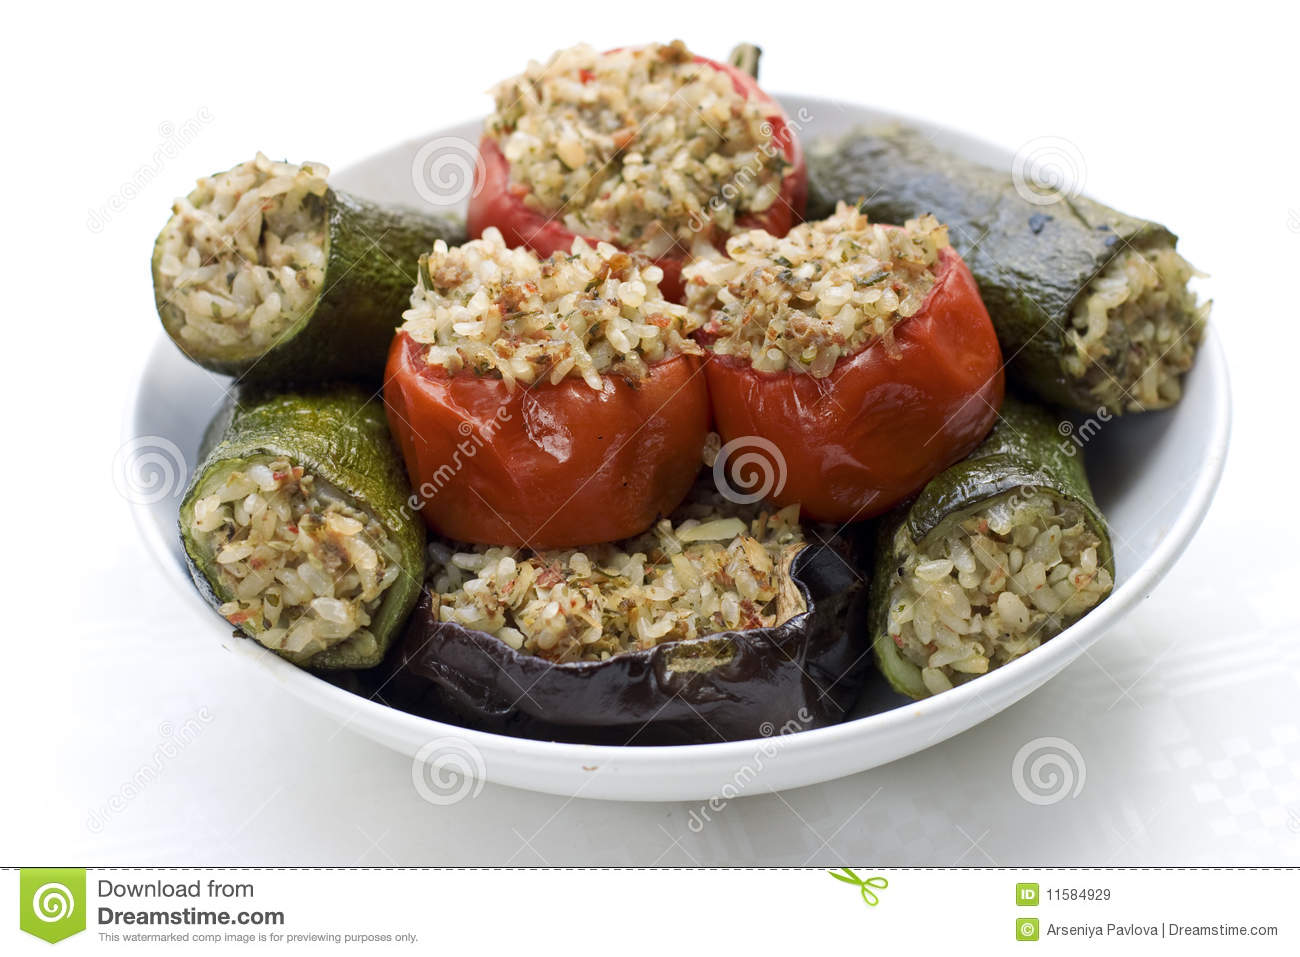 Vegetables Stuffed With Rice Royalty Free Stock Images   Image    